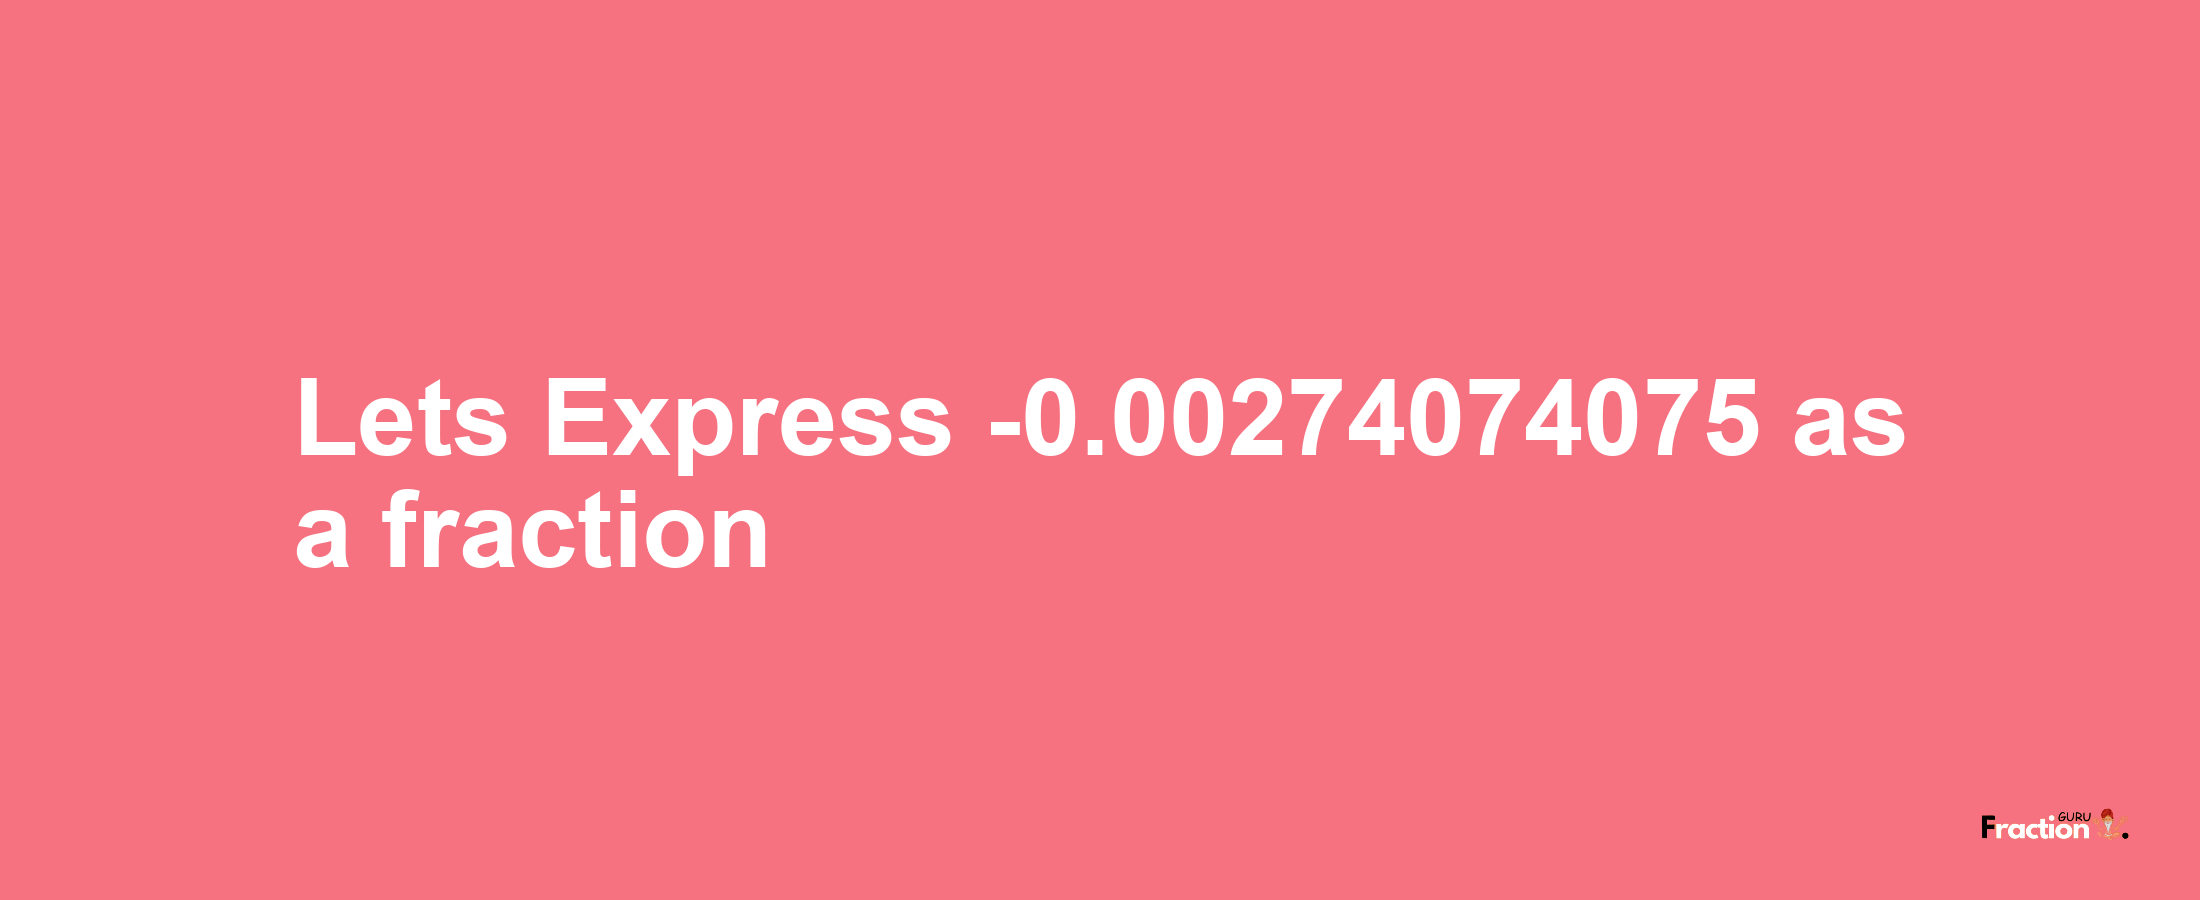 Lets Express -0.00274074075 as afraction